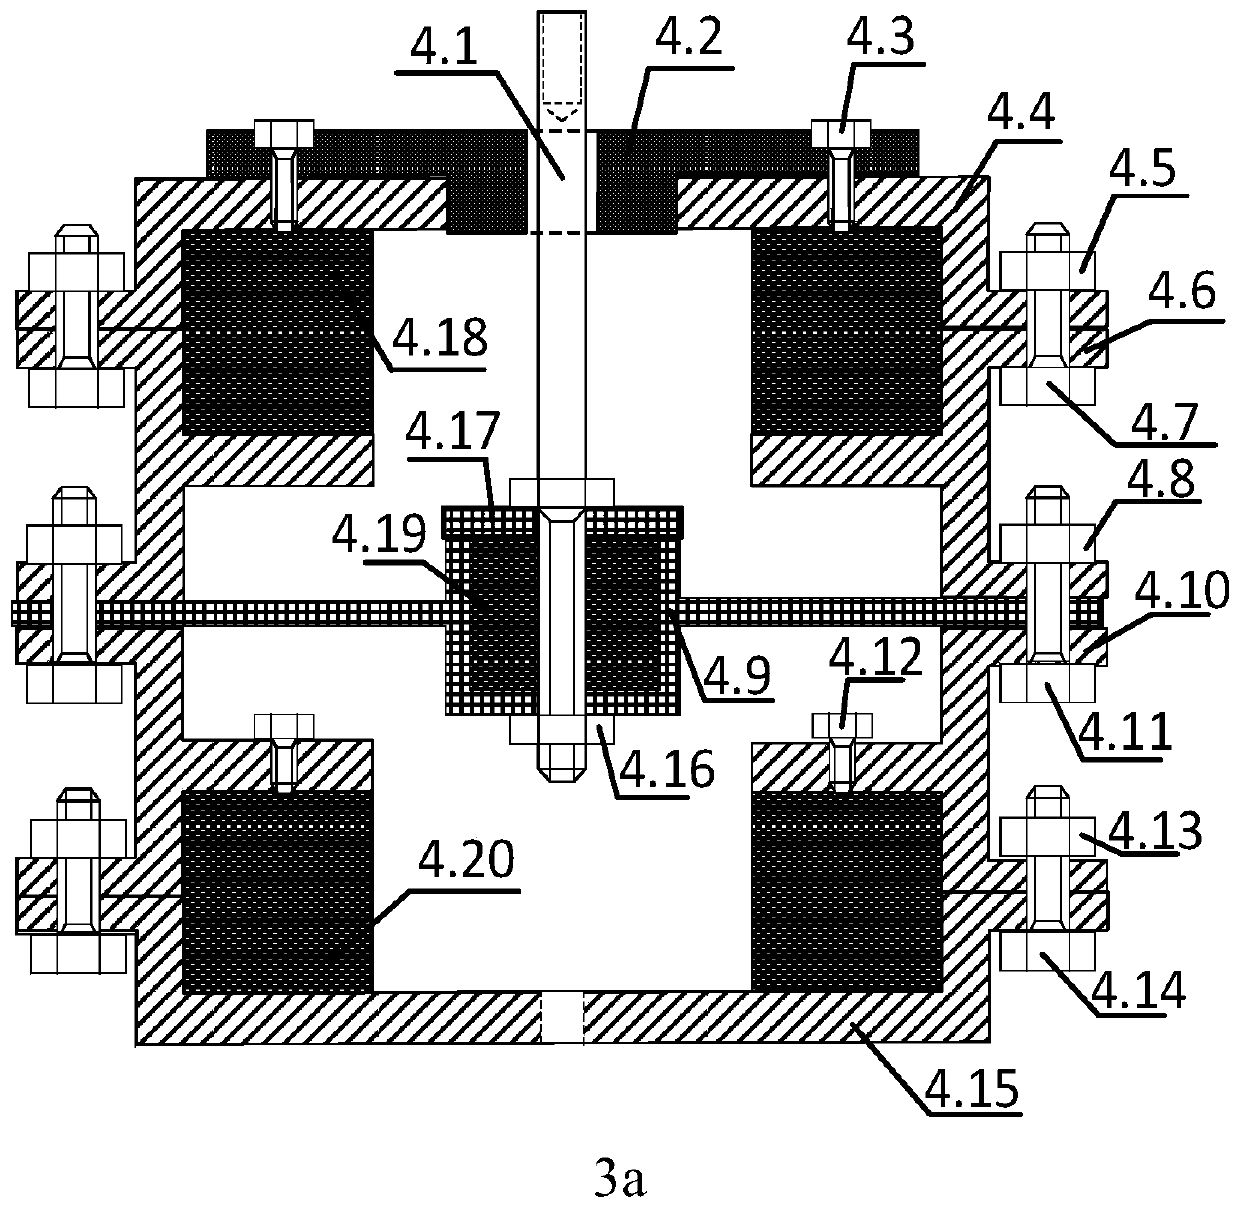 A multi-degree-of-freedom low-frequency vibration isolator based on the coupling of vibration mode and pendulum mode